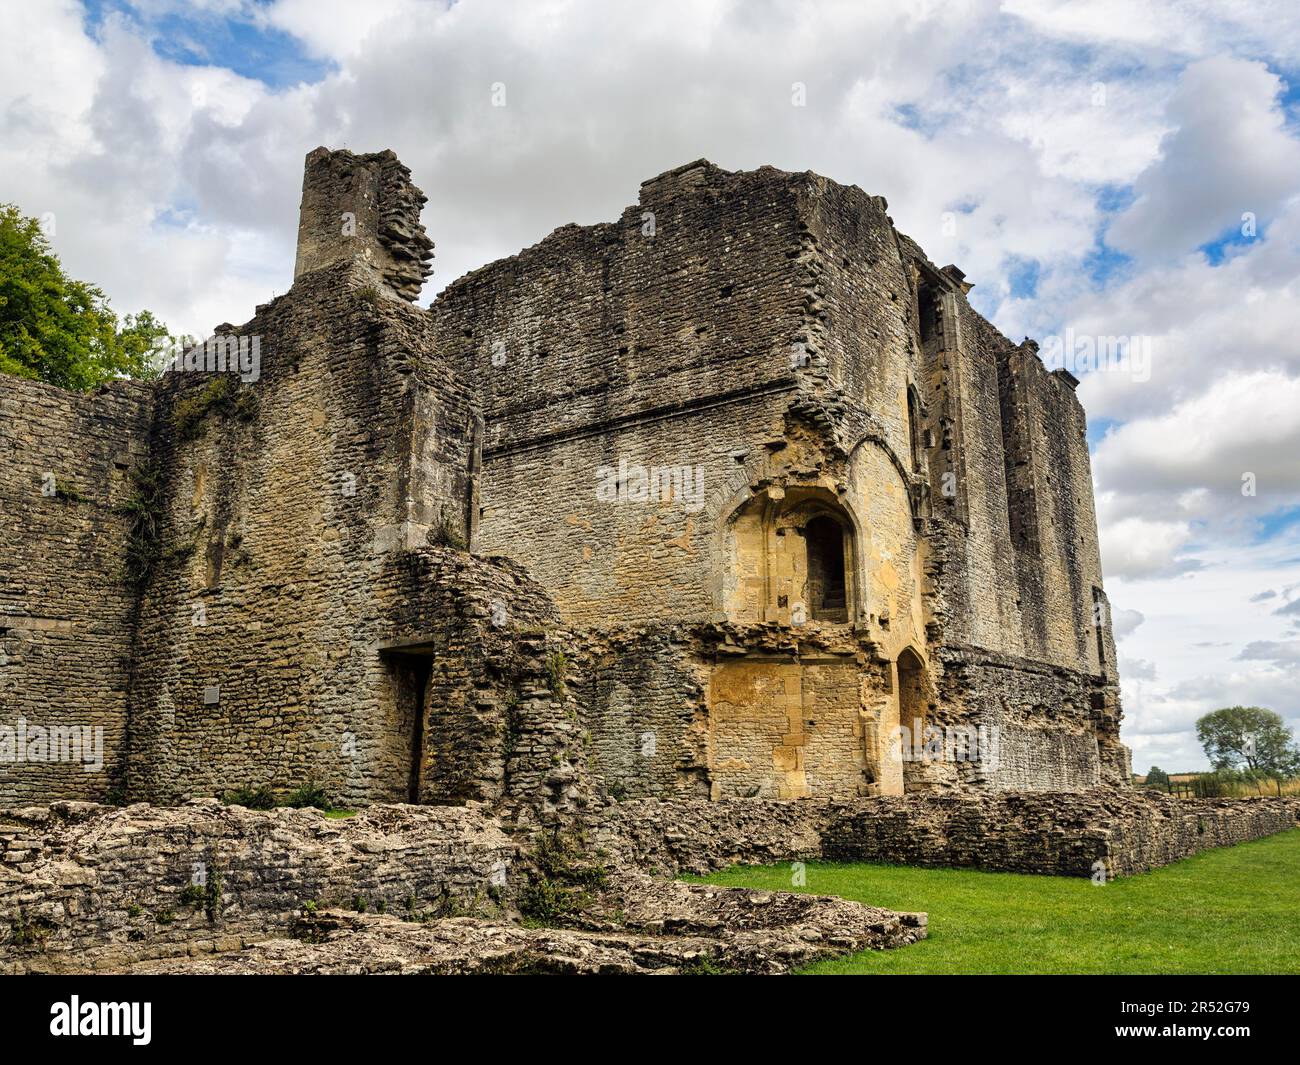 Ruin of Minster Lovell, Oxfordshire, Cotswolds, Angleterre, Royaume-Uni Banque D'Images